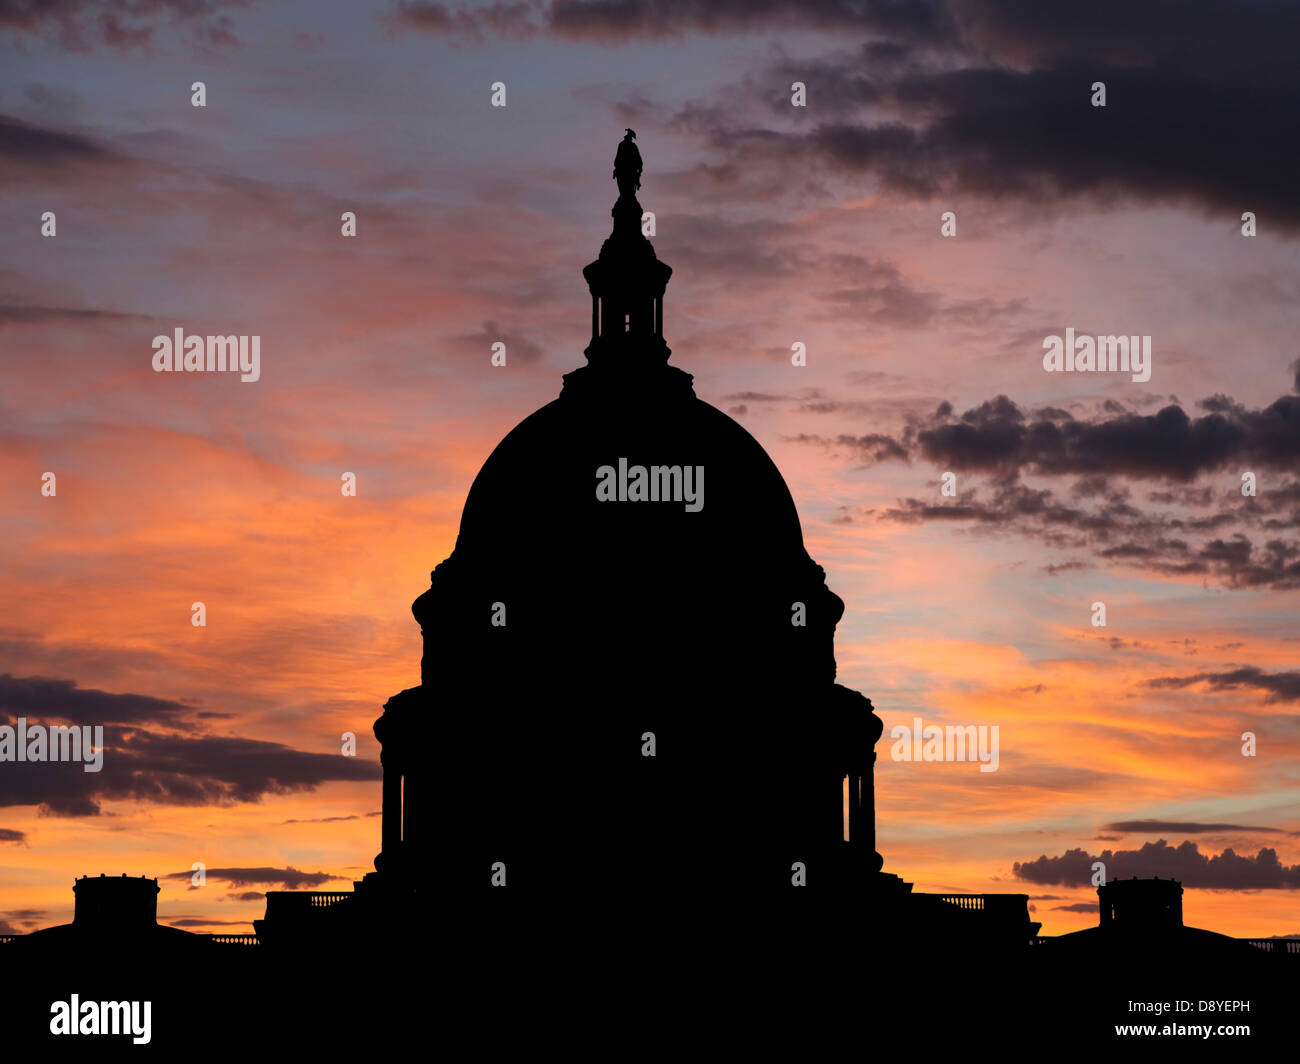 United States dome silhouette with sunrise sky. Stock Photo